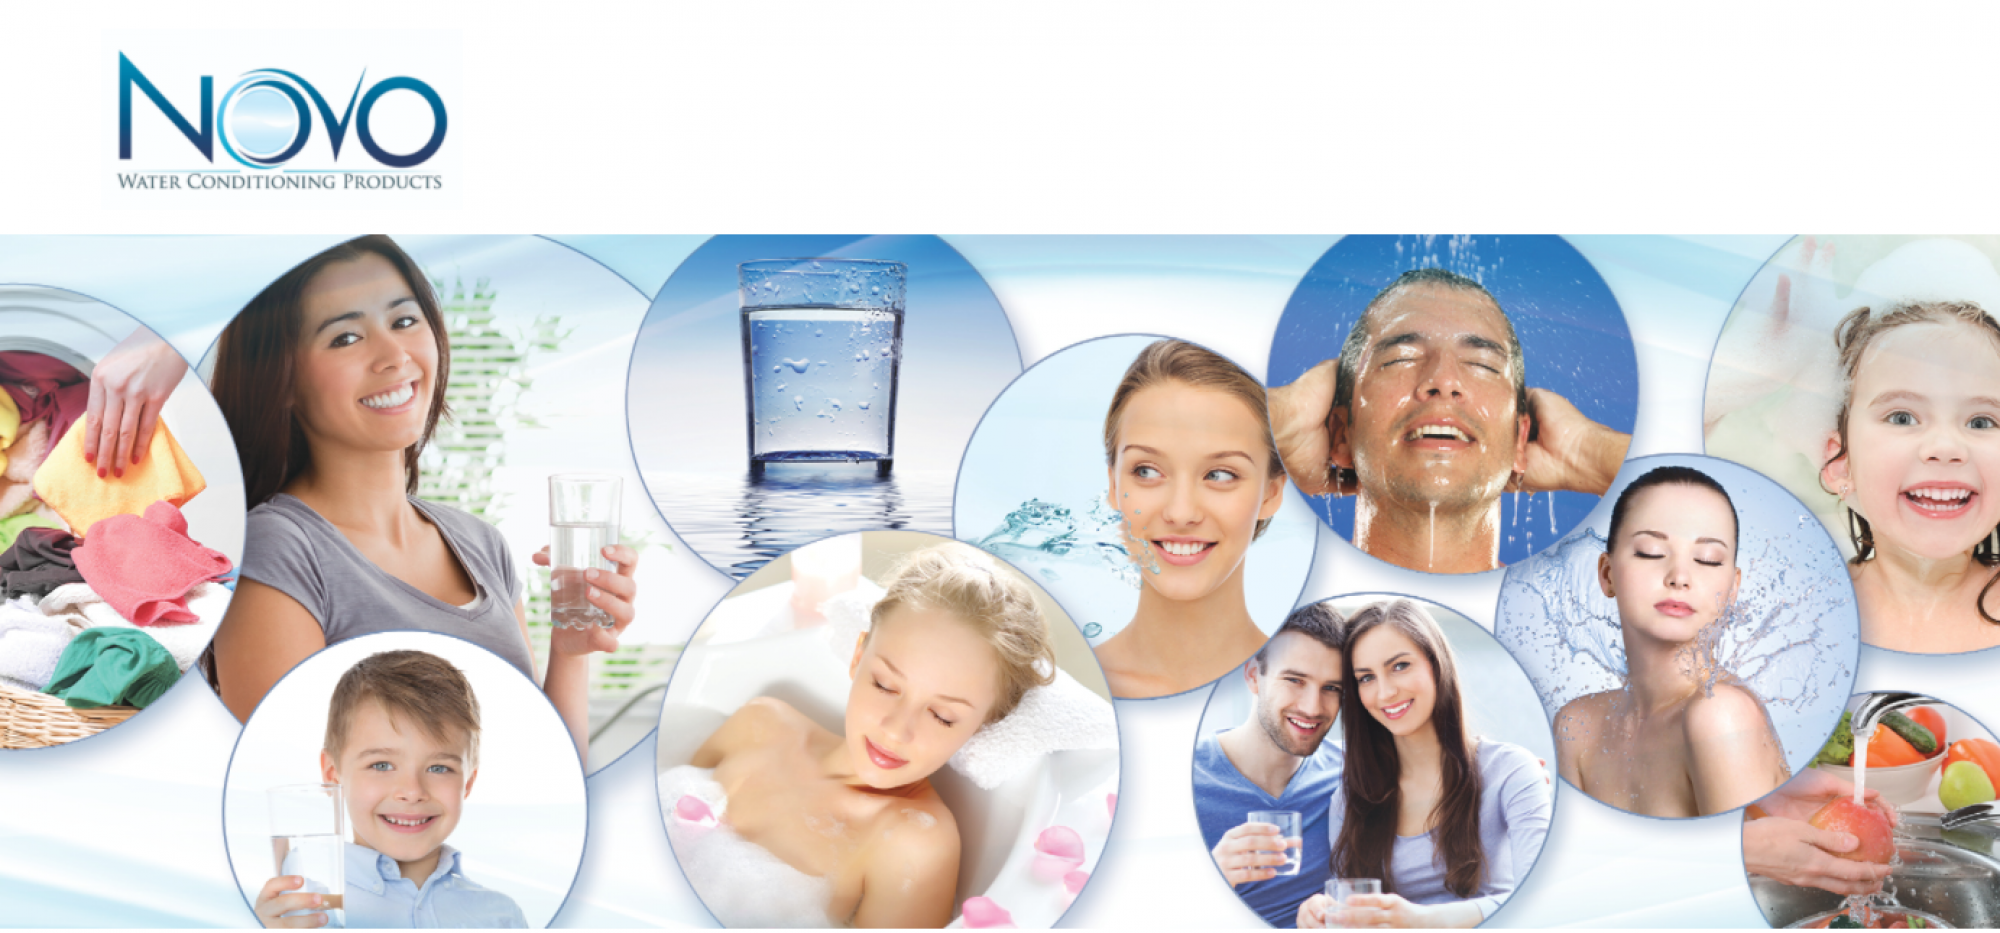 NOVO Water Conditioning Products